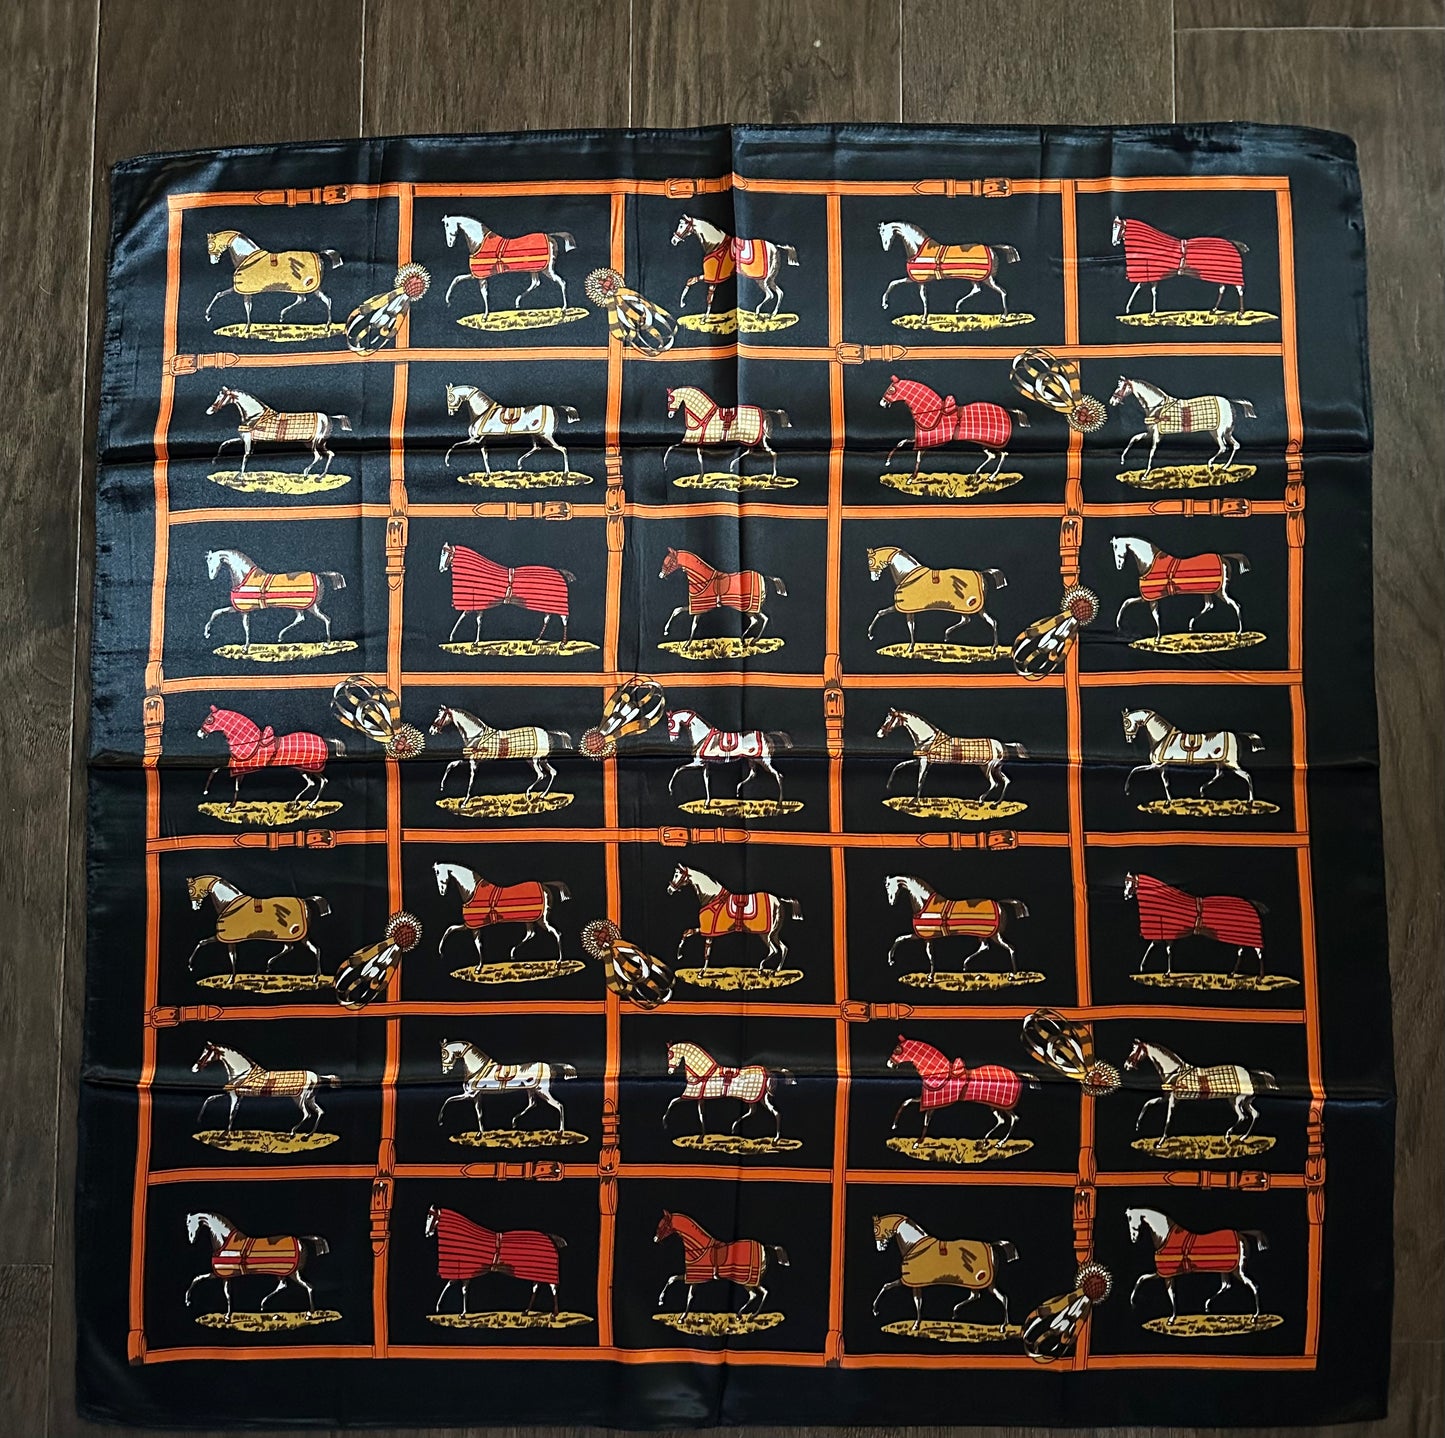 Rugs & Ribbons - Black - The Thrifty Cowgirl, Co.